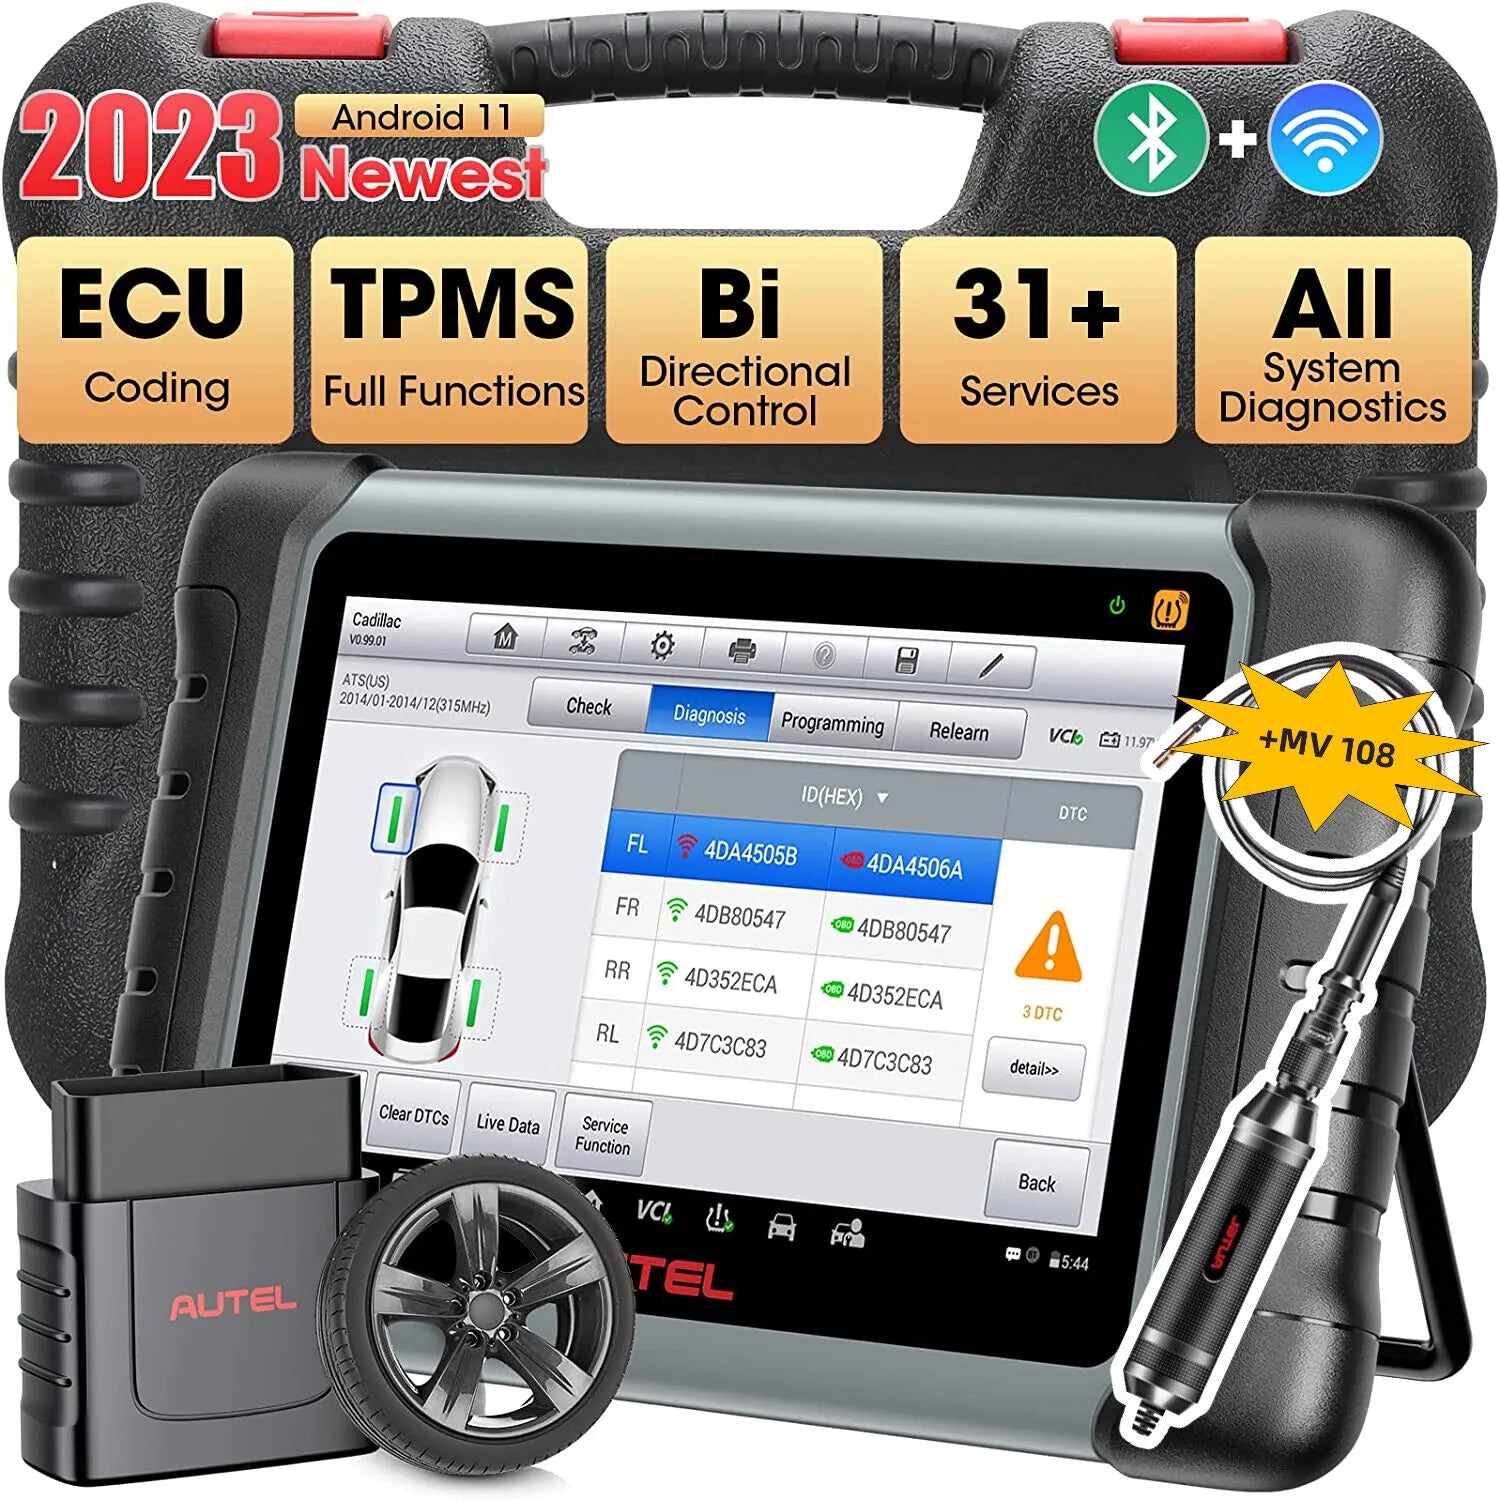 2 Years Update]Autel Scanner MaxiPRO MP808Z-TS All System Auto